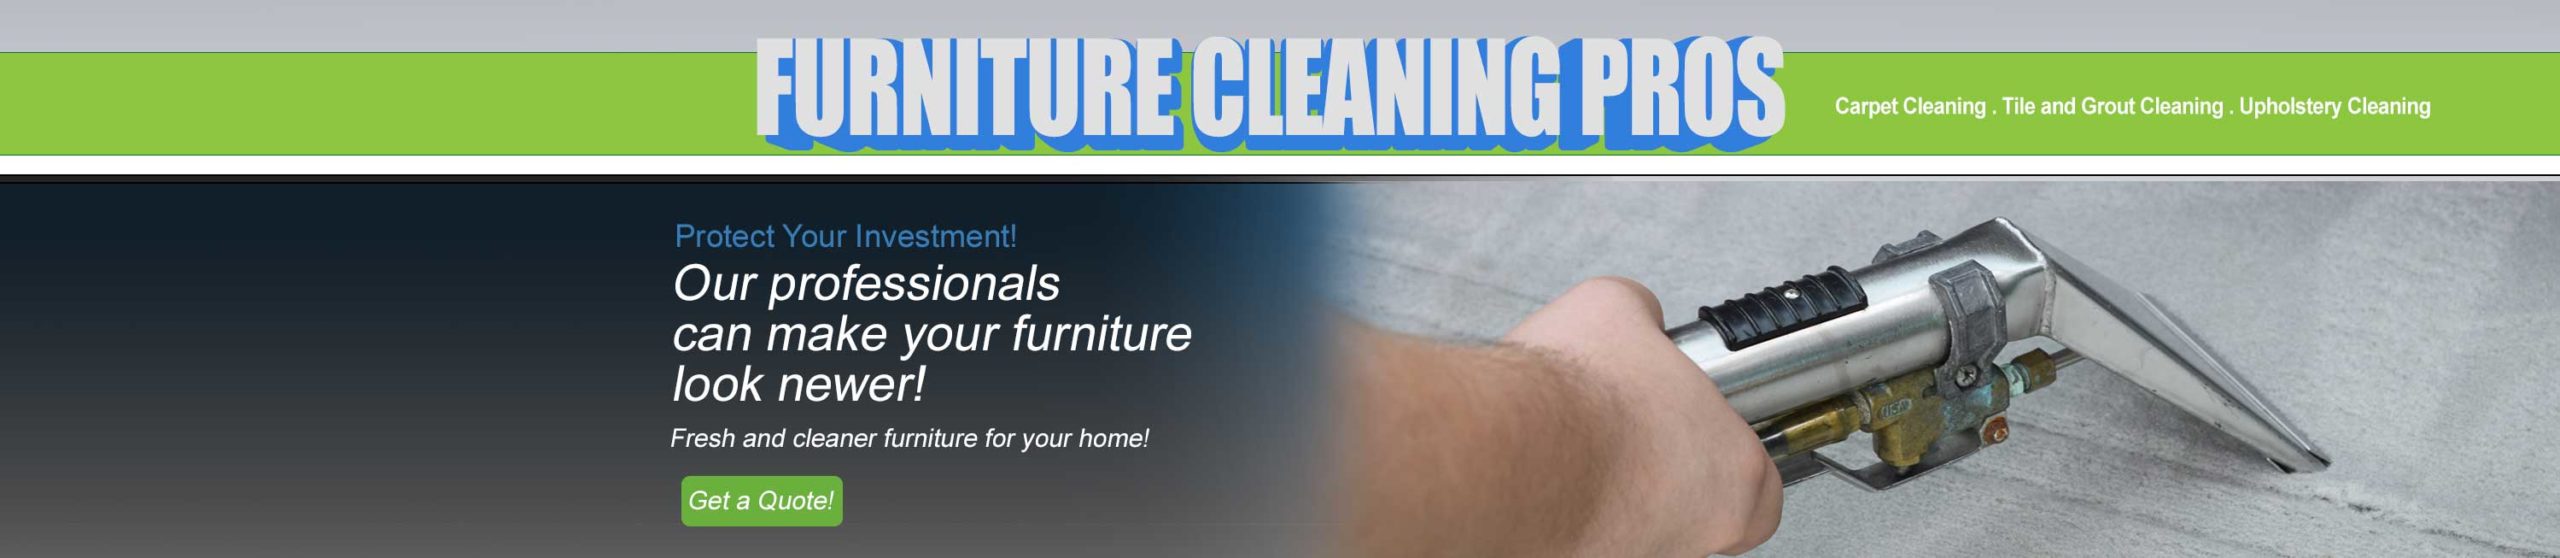 Furniture and upholstery cleaning in Peoria AZ